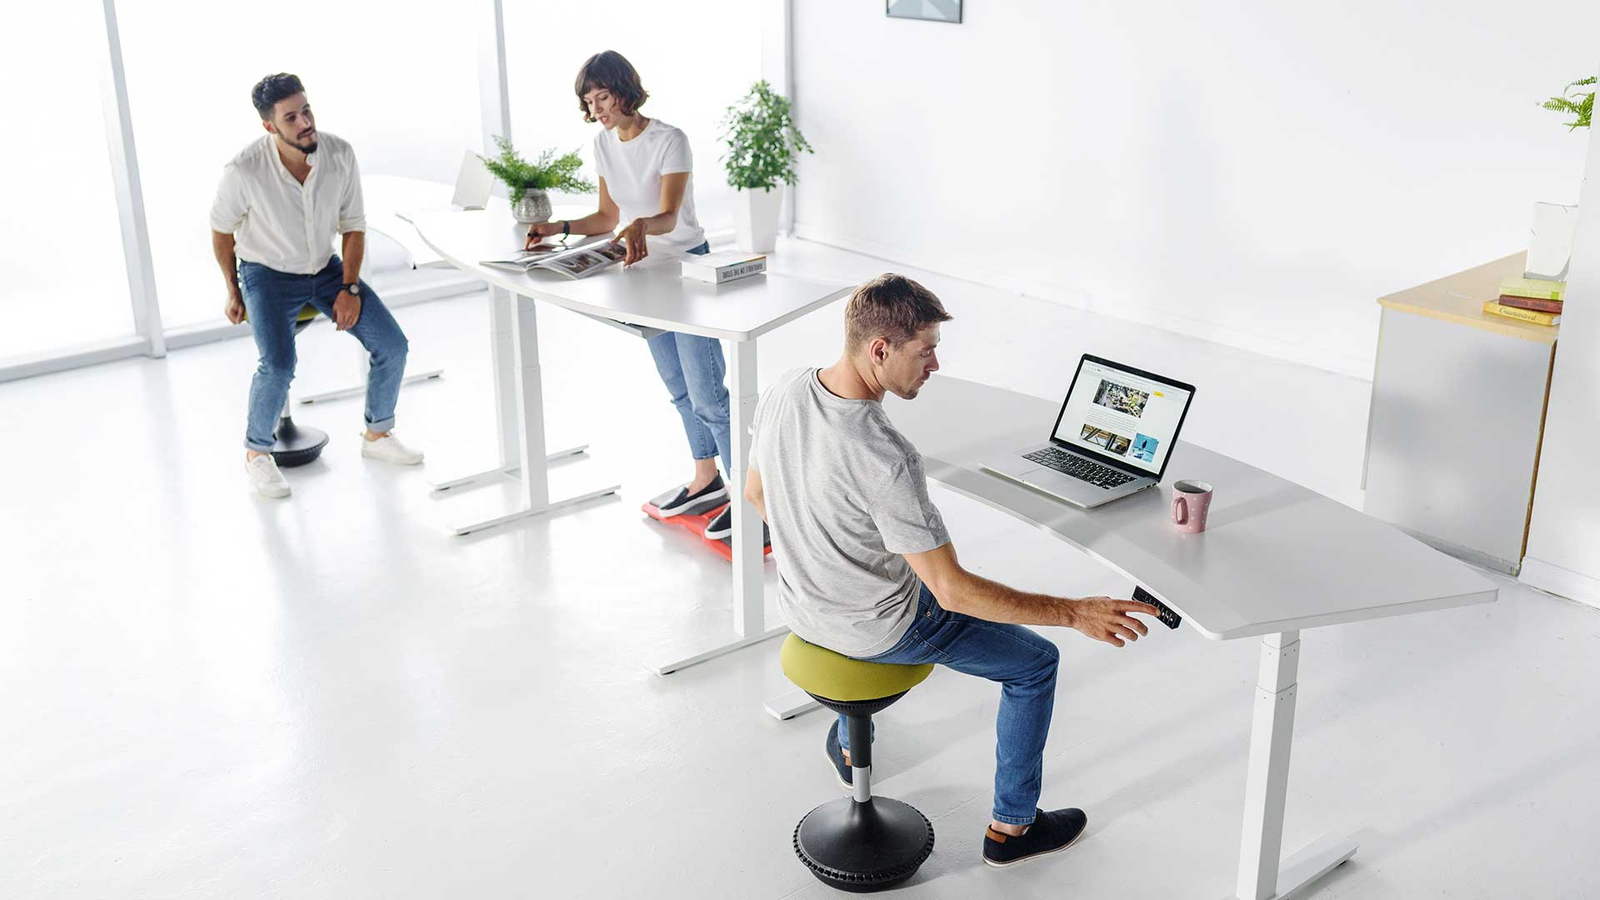 What Is The Best Shape For An Adjustable Standing Desk?